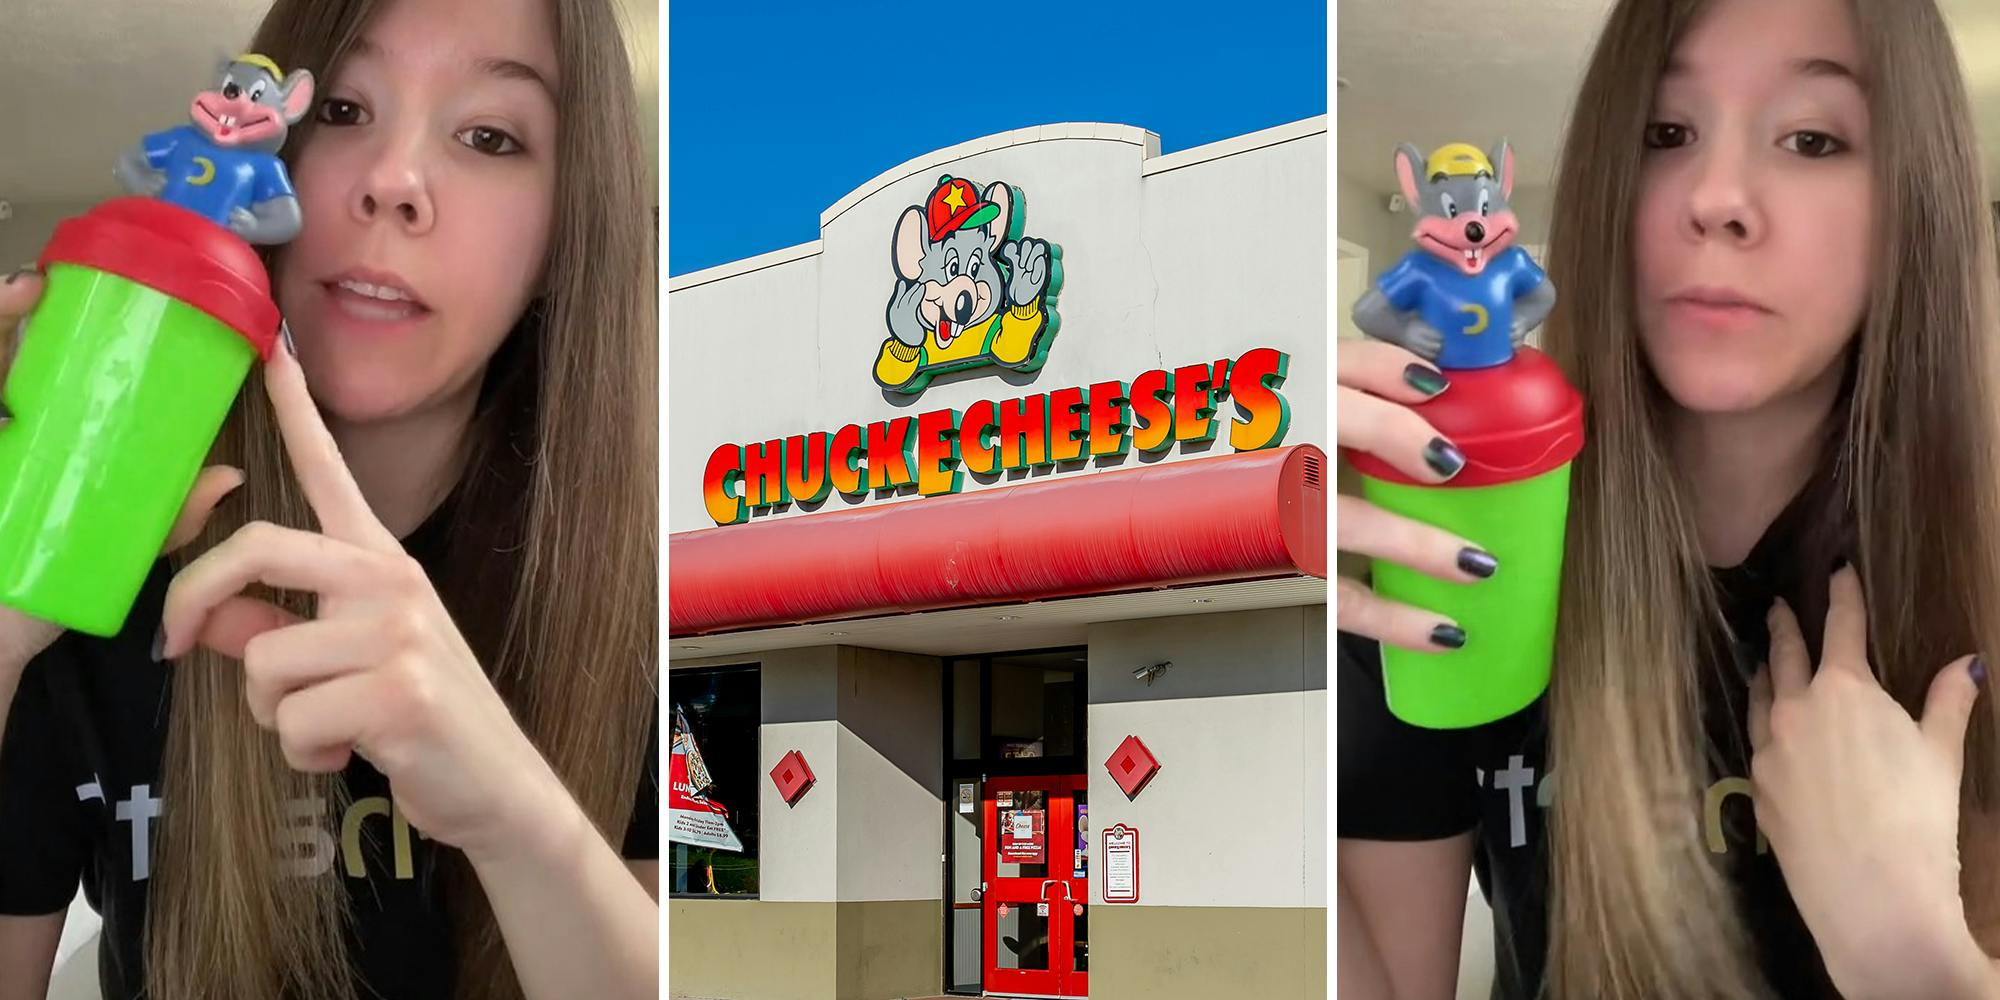 Woman finds ‘inappropriate’ Chuck E. Cheese cup at Goodwill